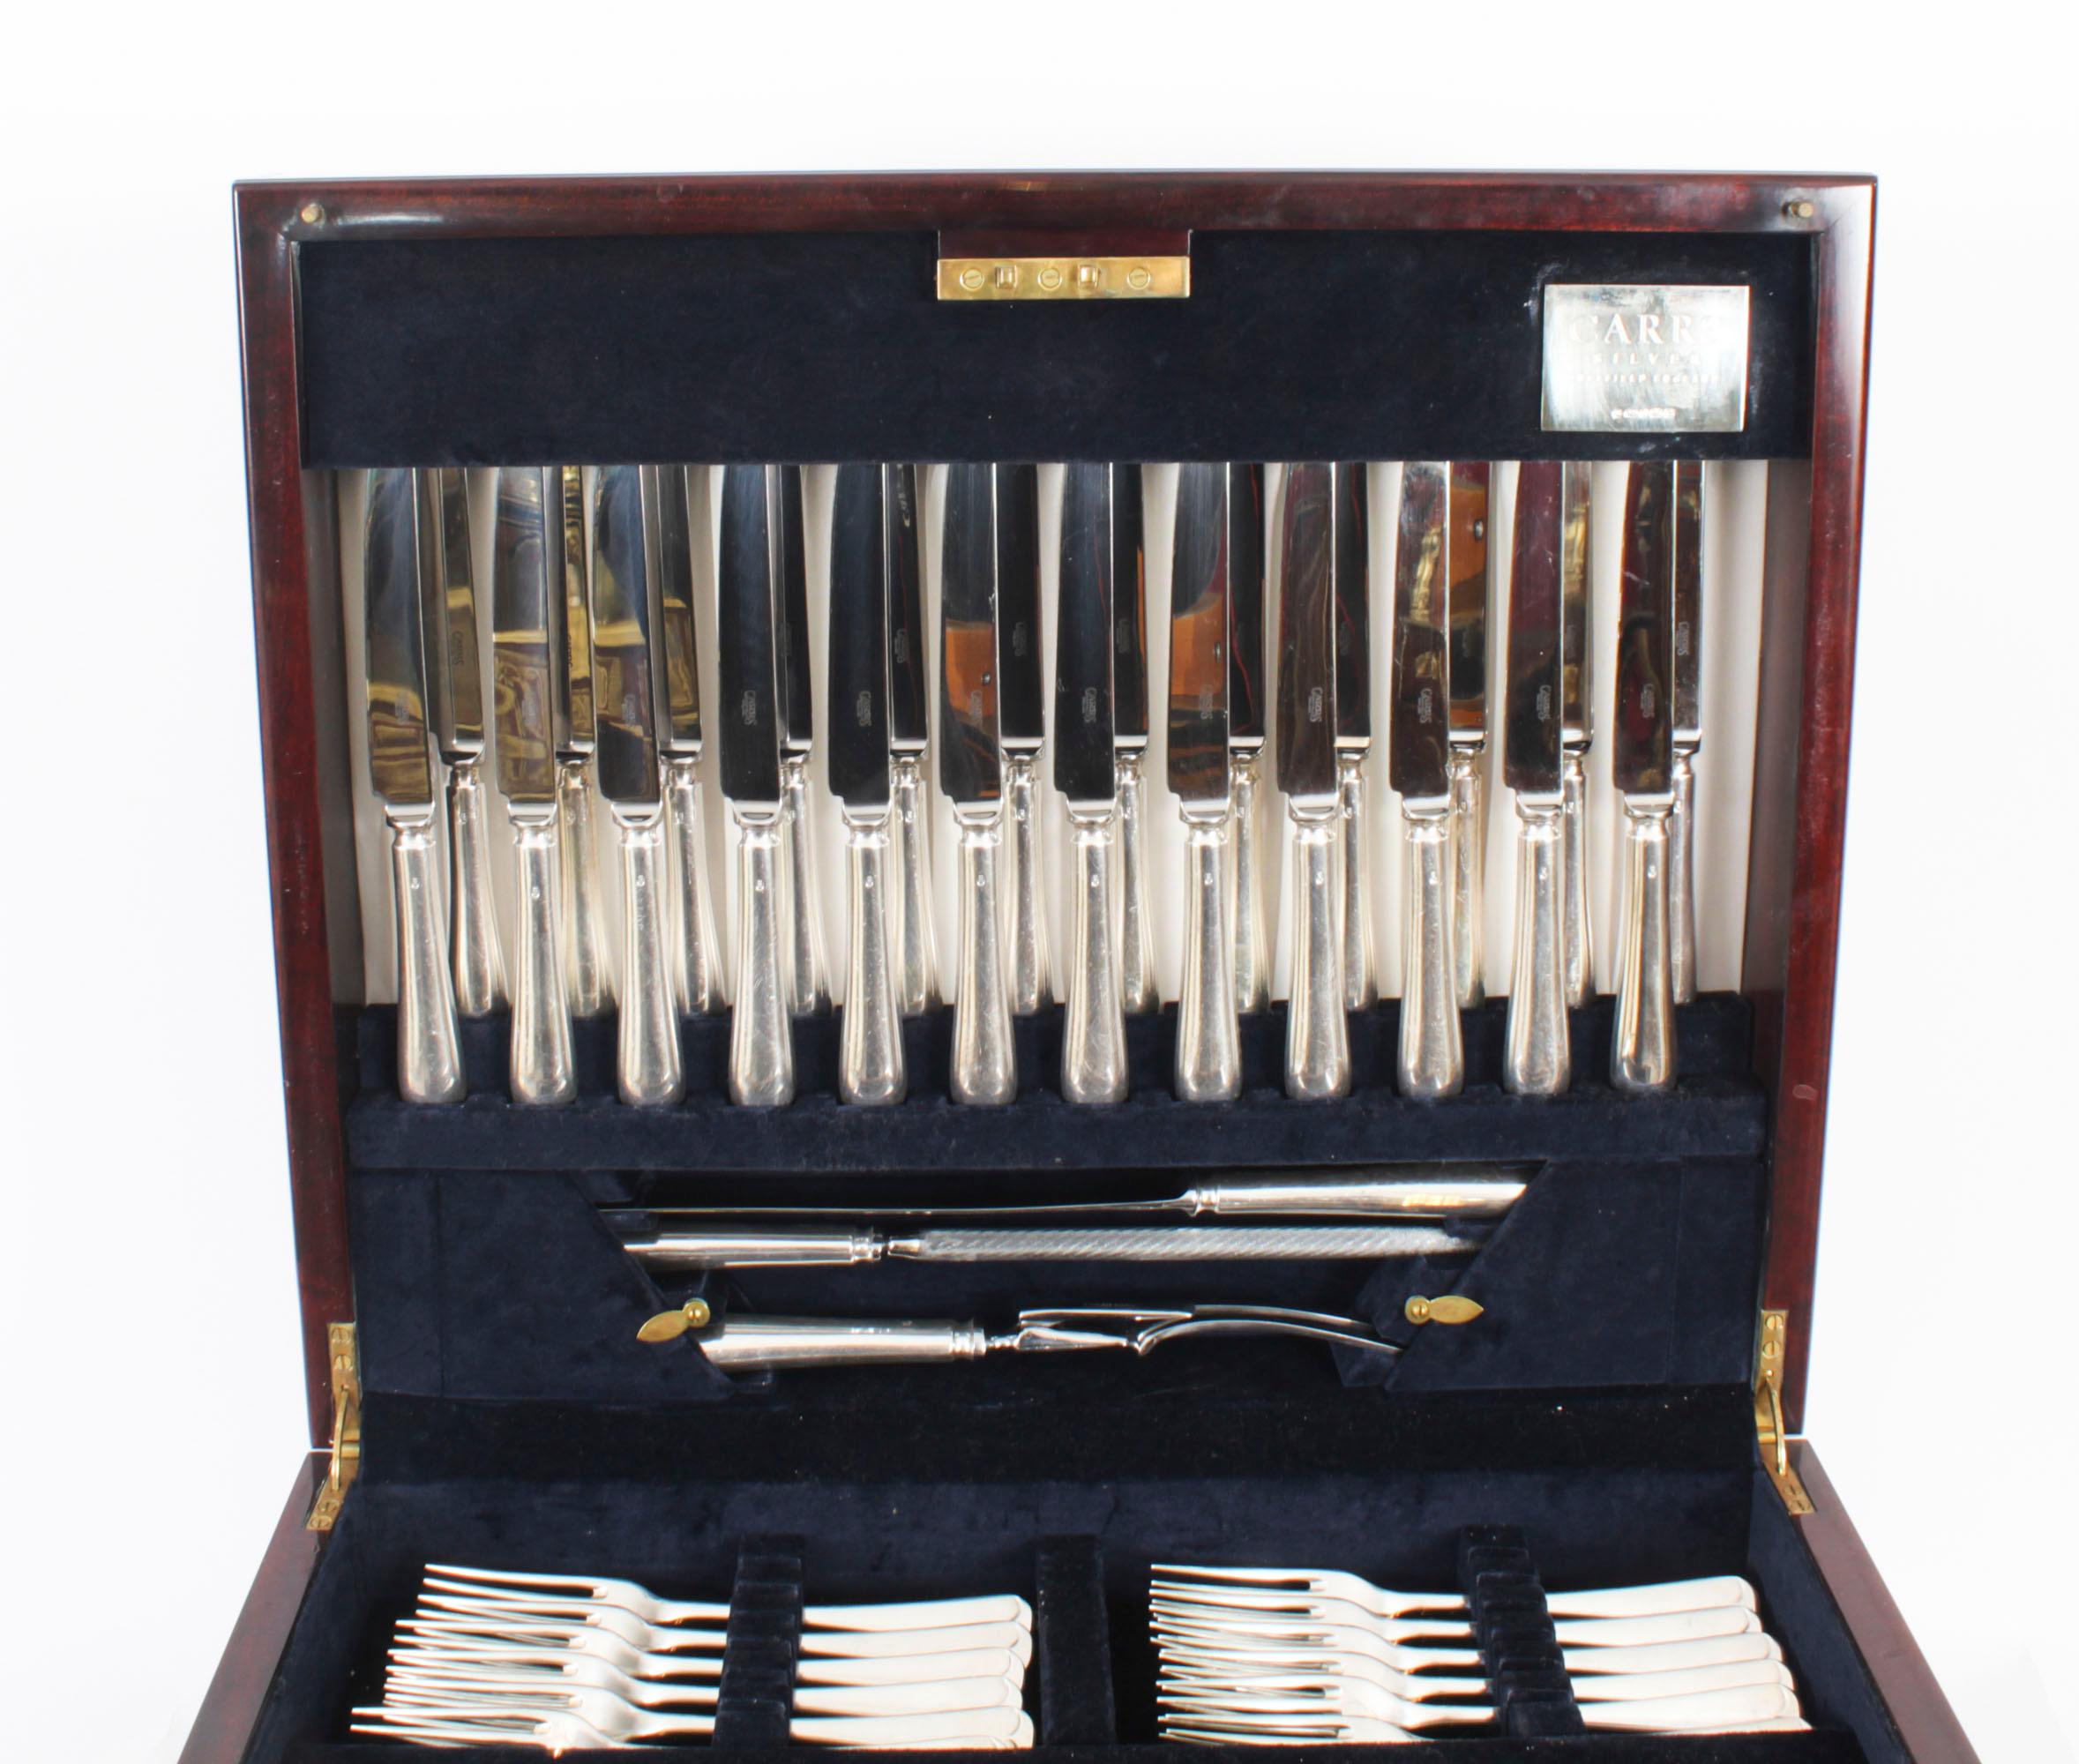 Contemporary Vintage150 Piece Canteen-12 Place Sterling Silver Cutlery Set by Carrs 2004 For Sale